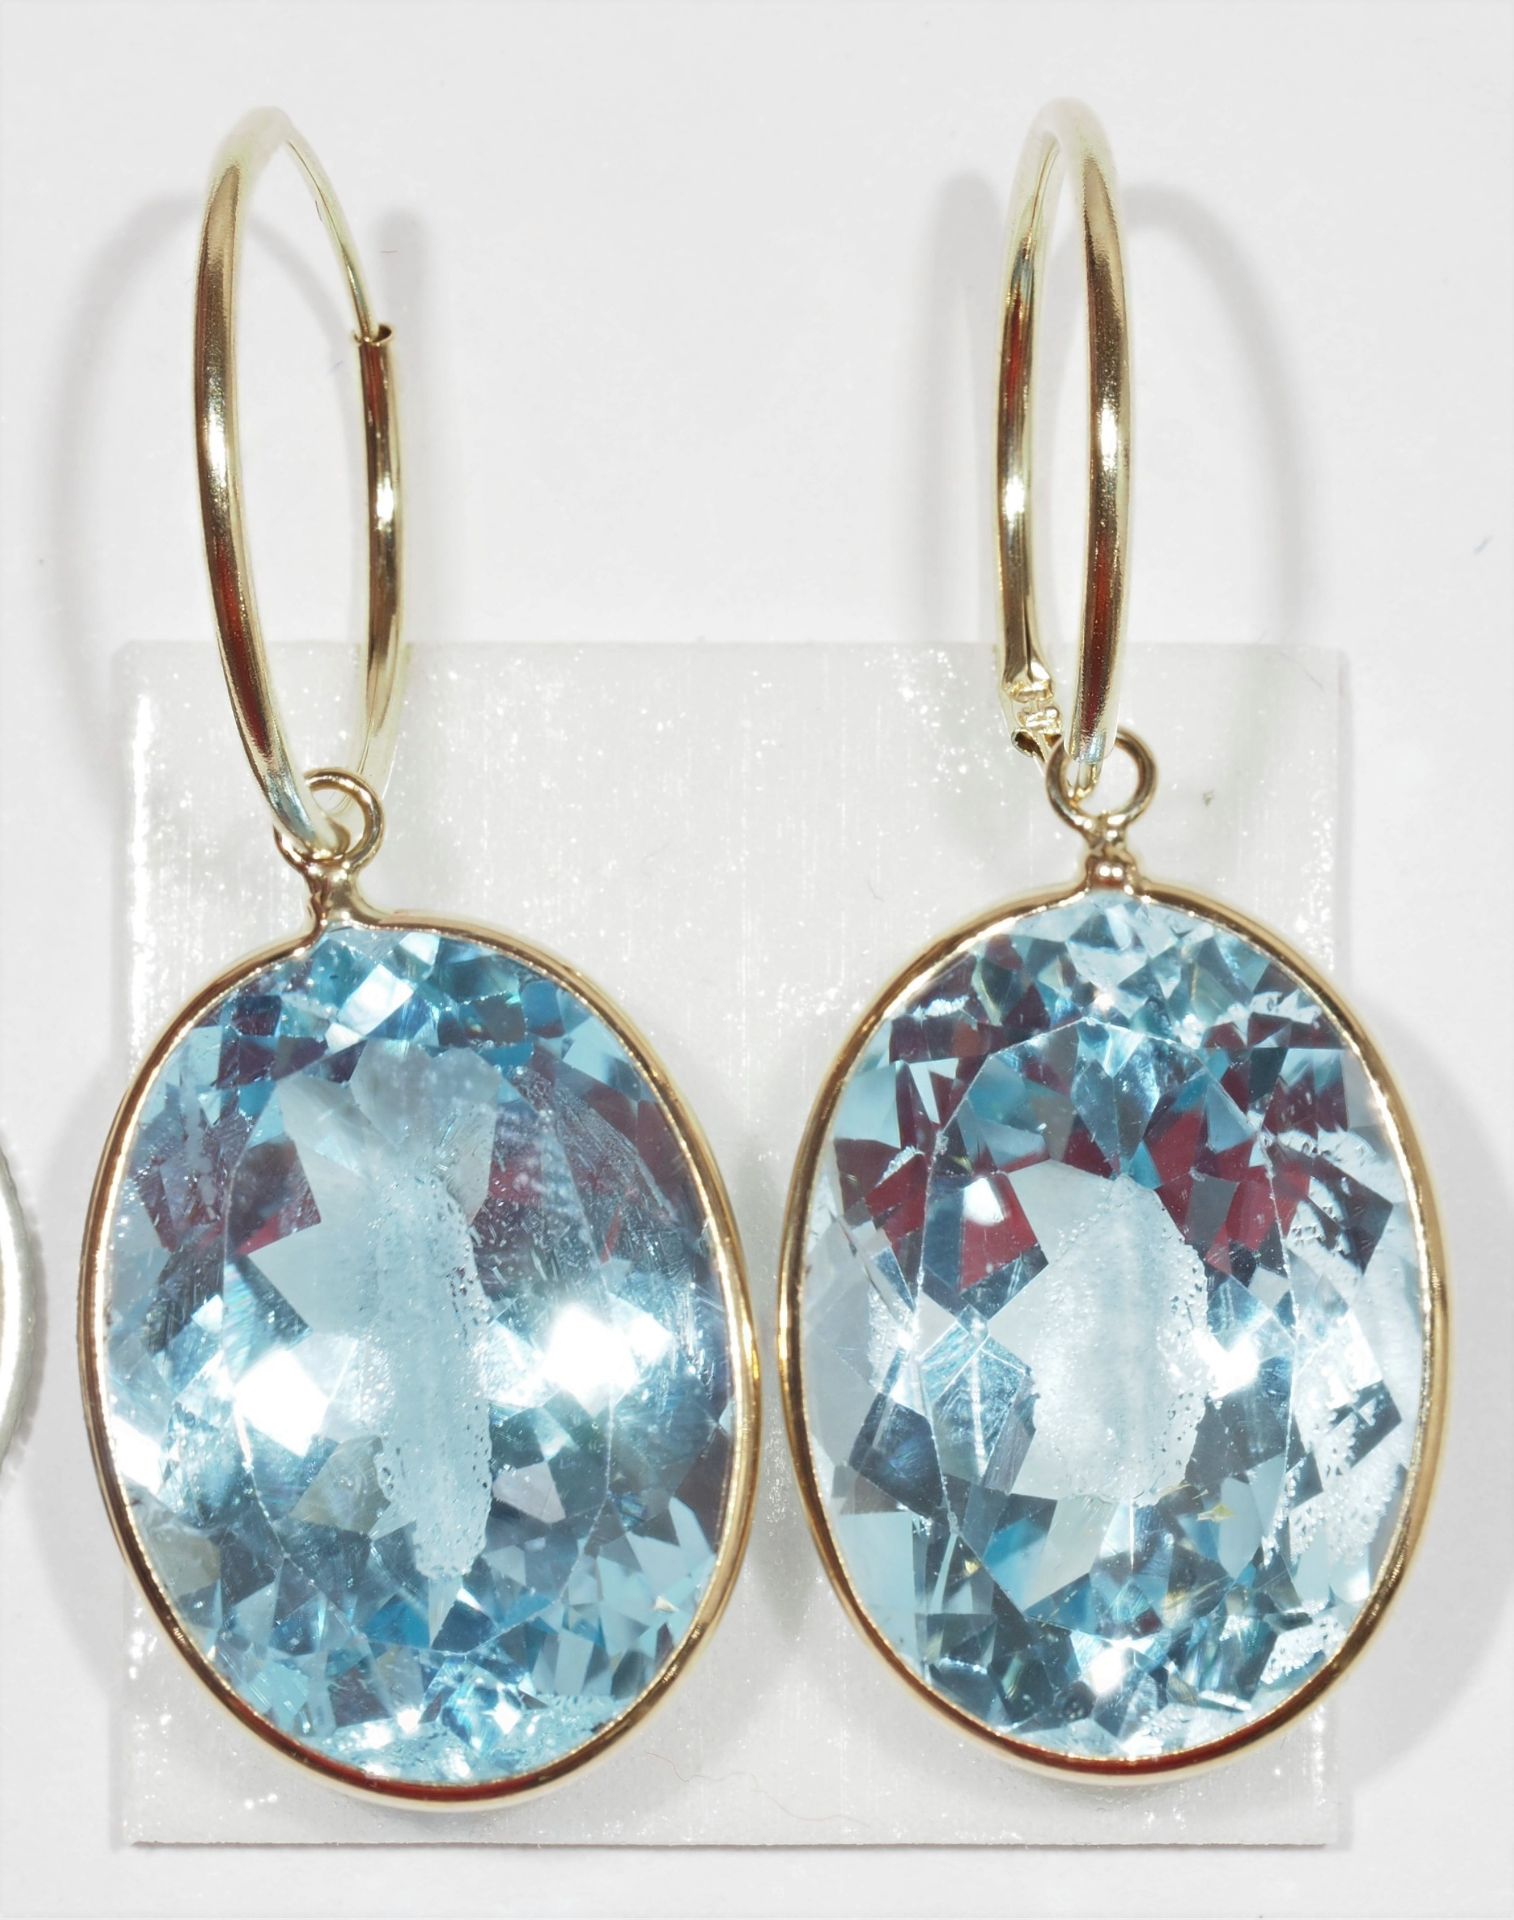 14K Yellow Gold Large Blue Topaz (31.0ct) Hoope Earrings w/ New Gift Box, Insurance Value $1600